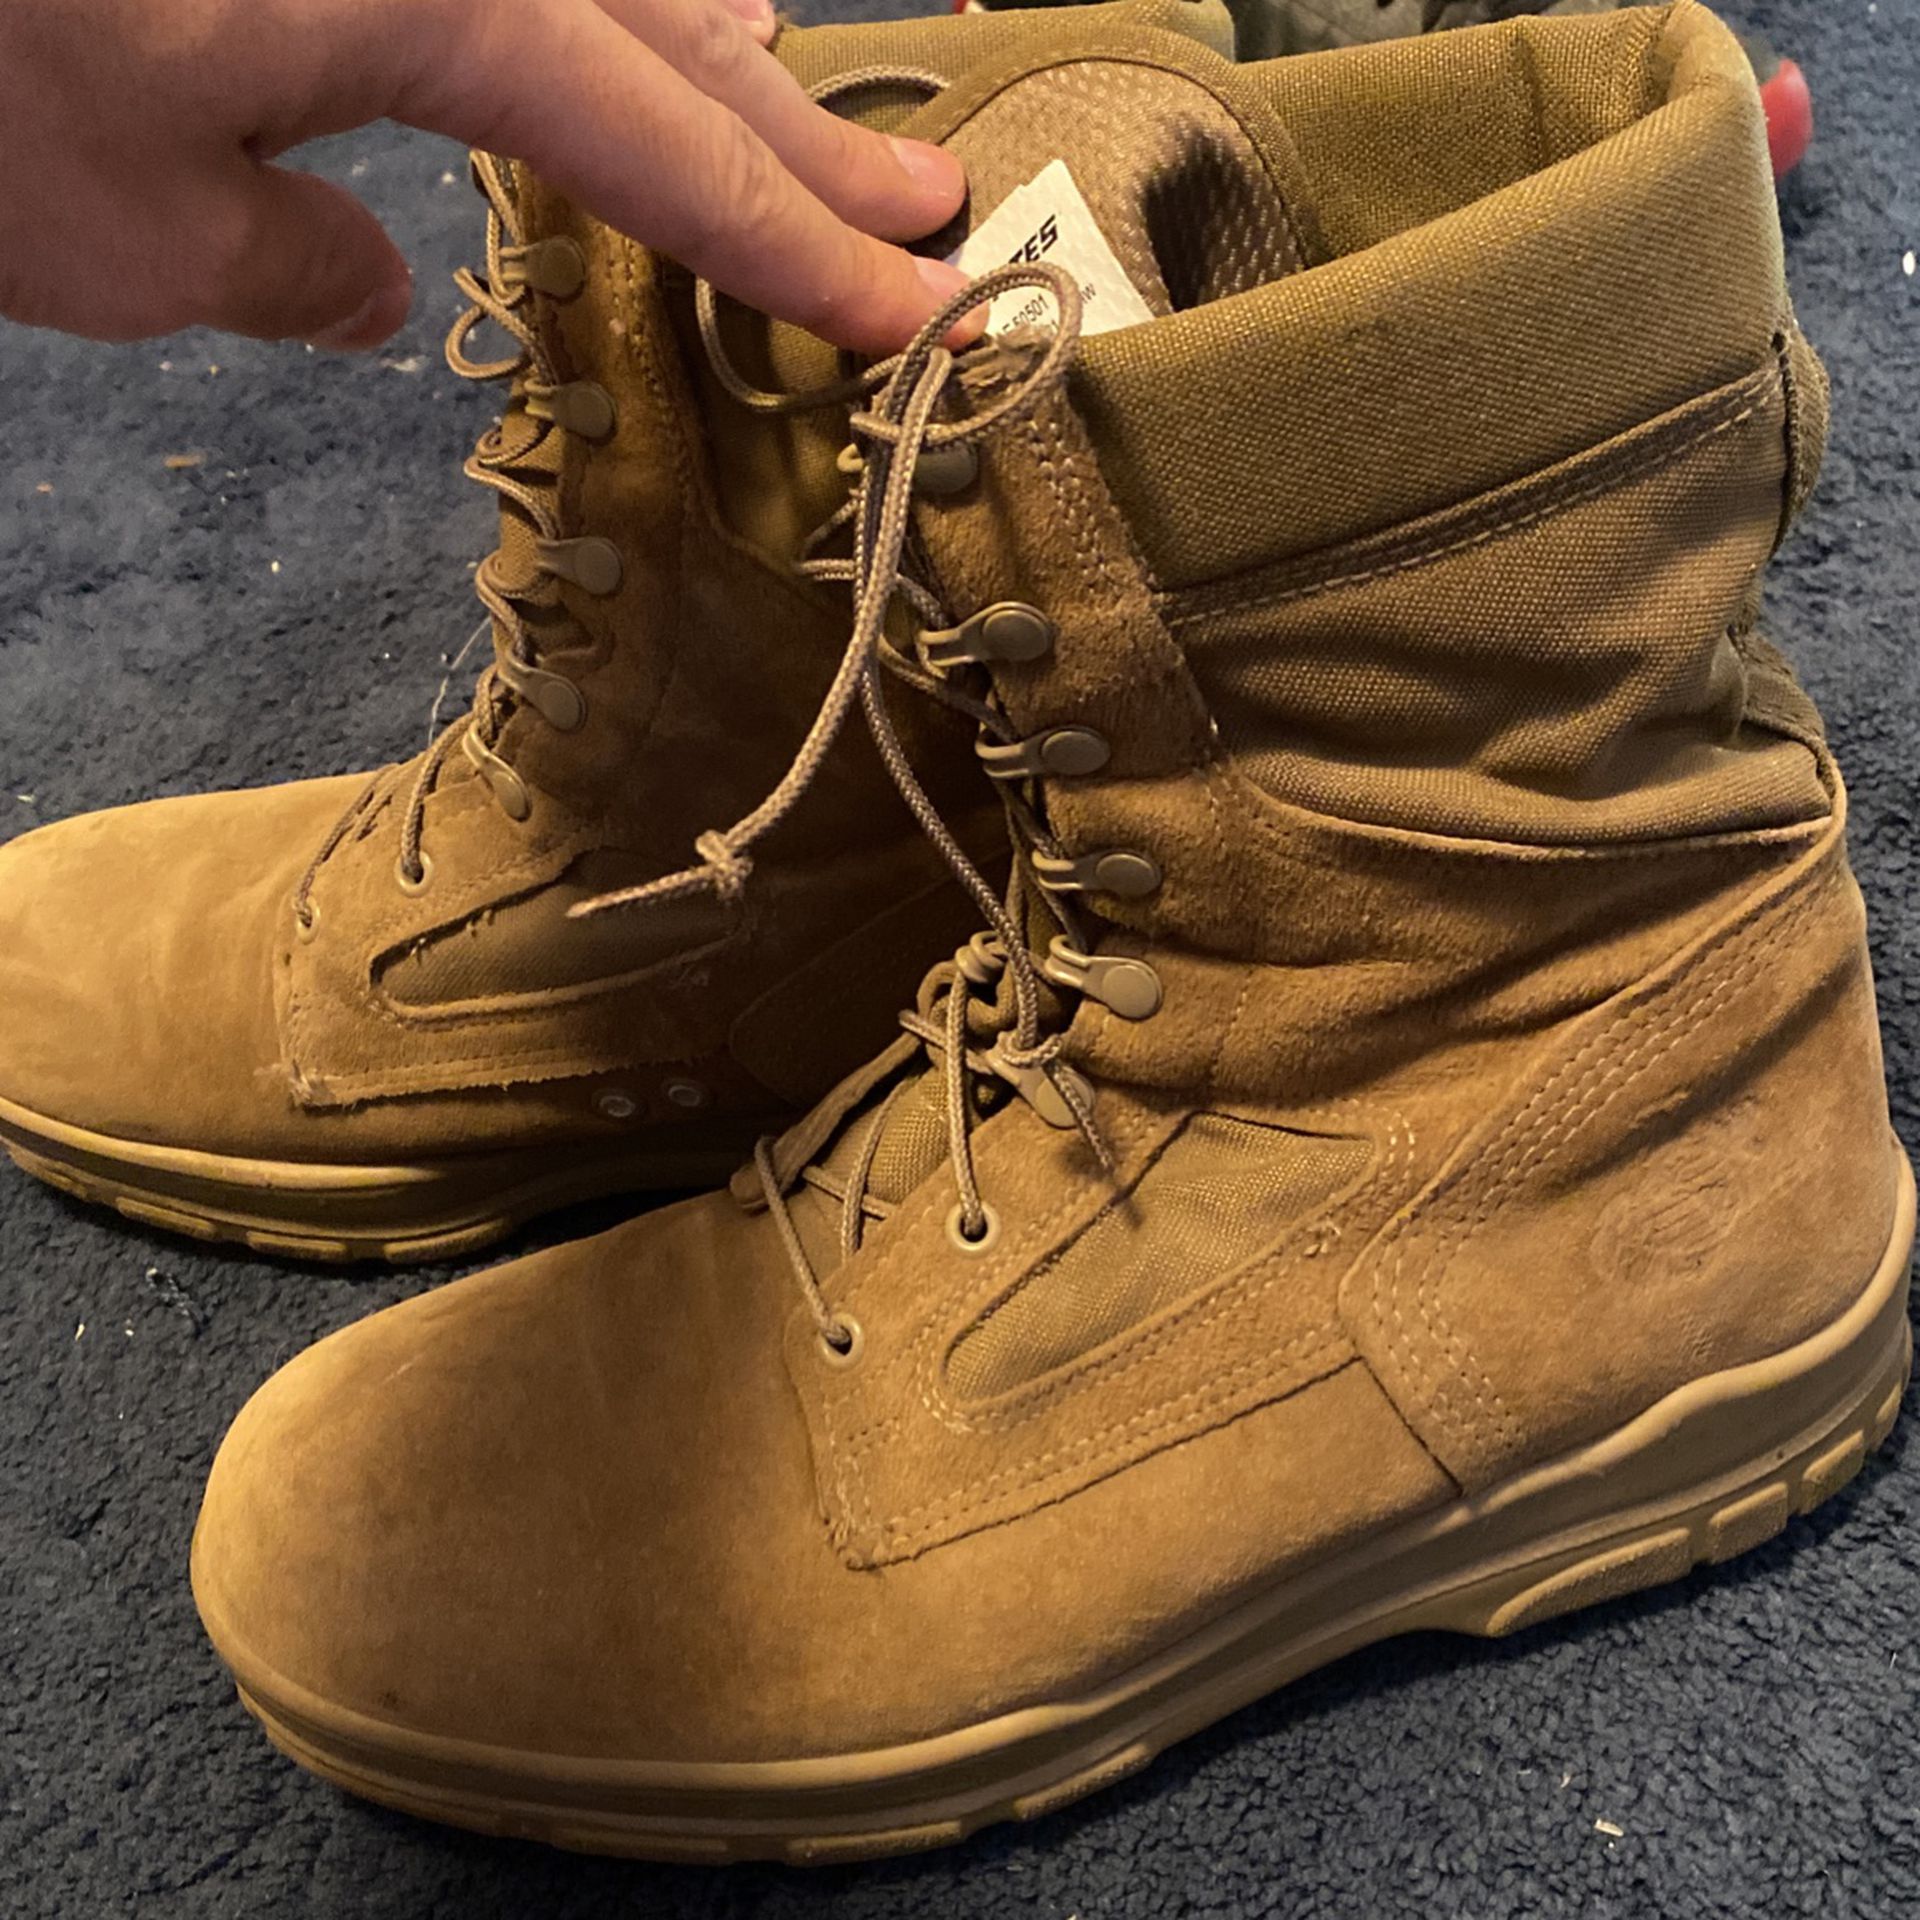 Humano Decimal oyente Bates Lights Millitary Boots for Sale in Clovis, CA - OfferUp